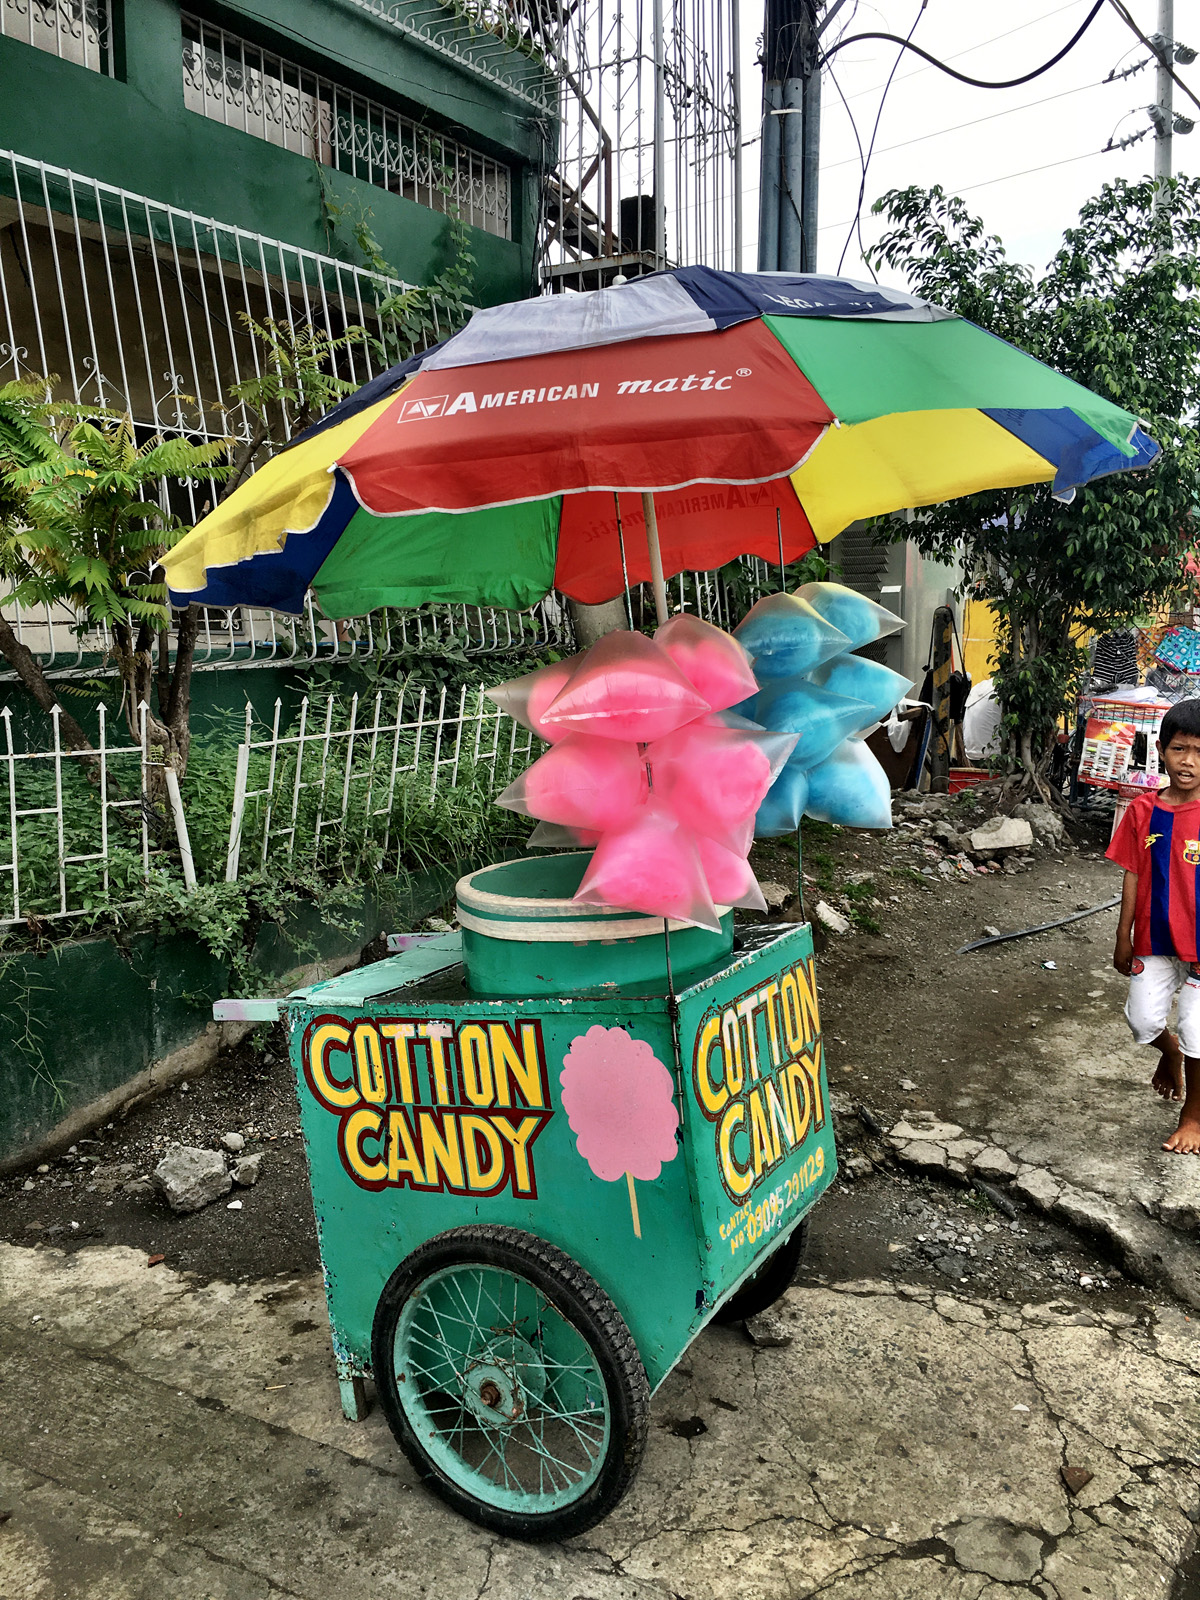 Cotton candy vendor on the side of the road.